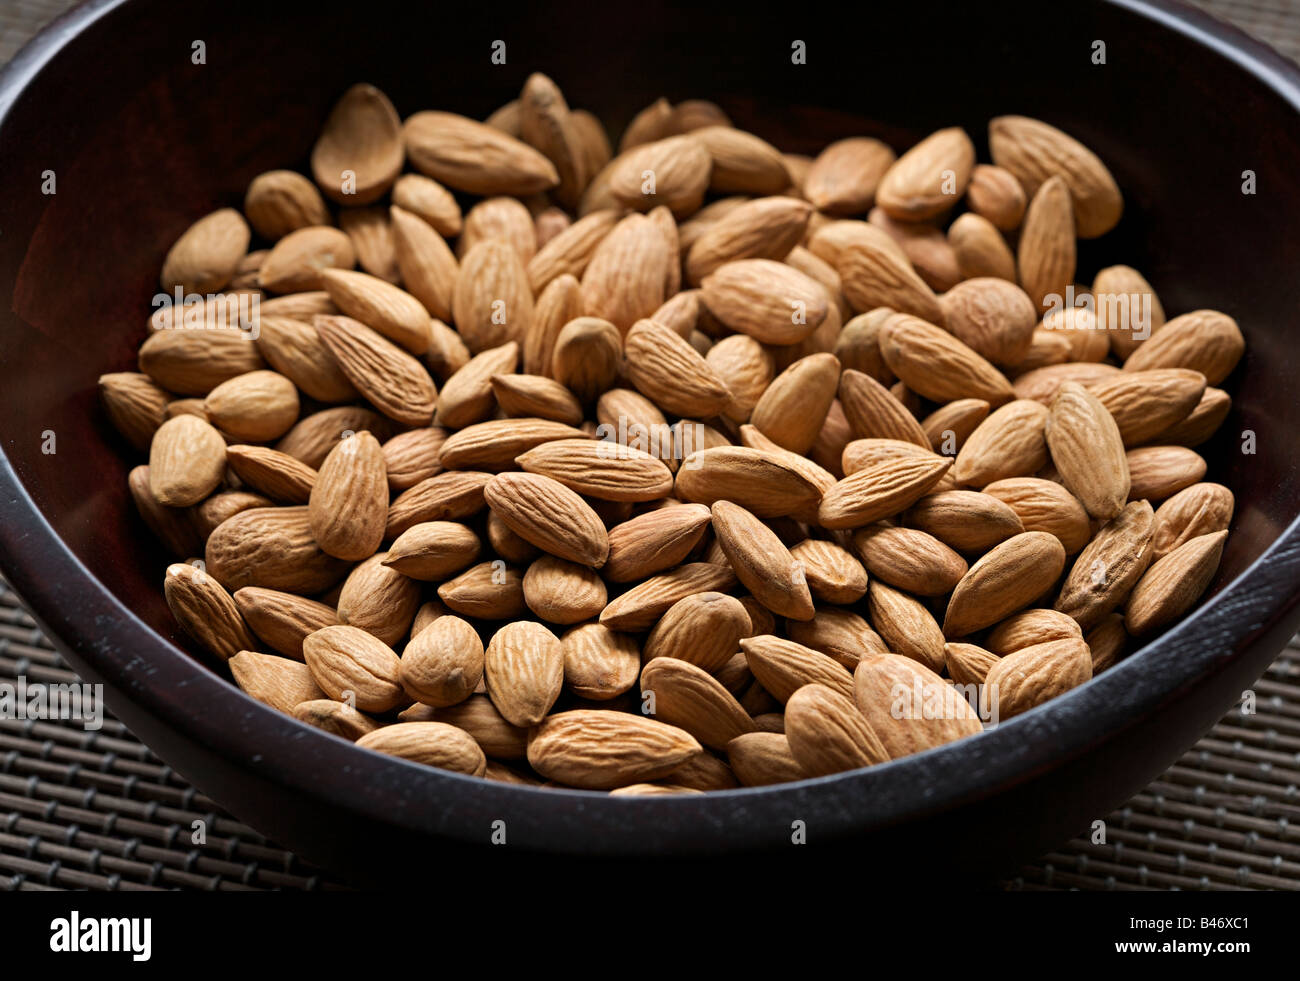 Organic raw almonds in a wooden bowl Stock Photo